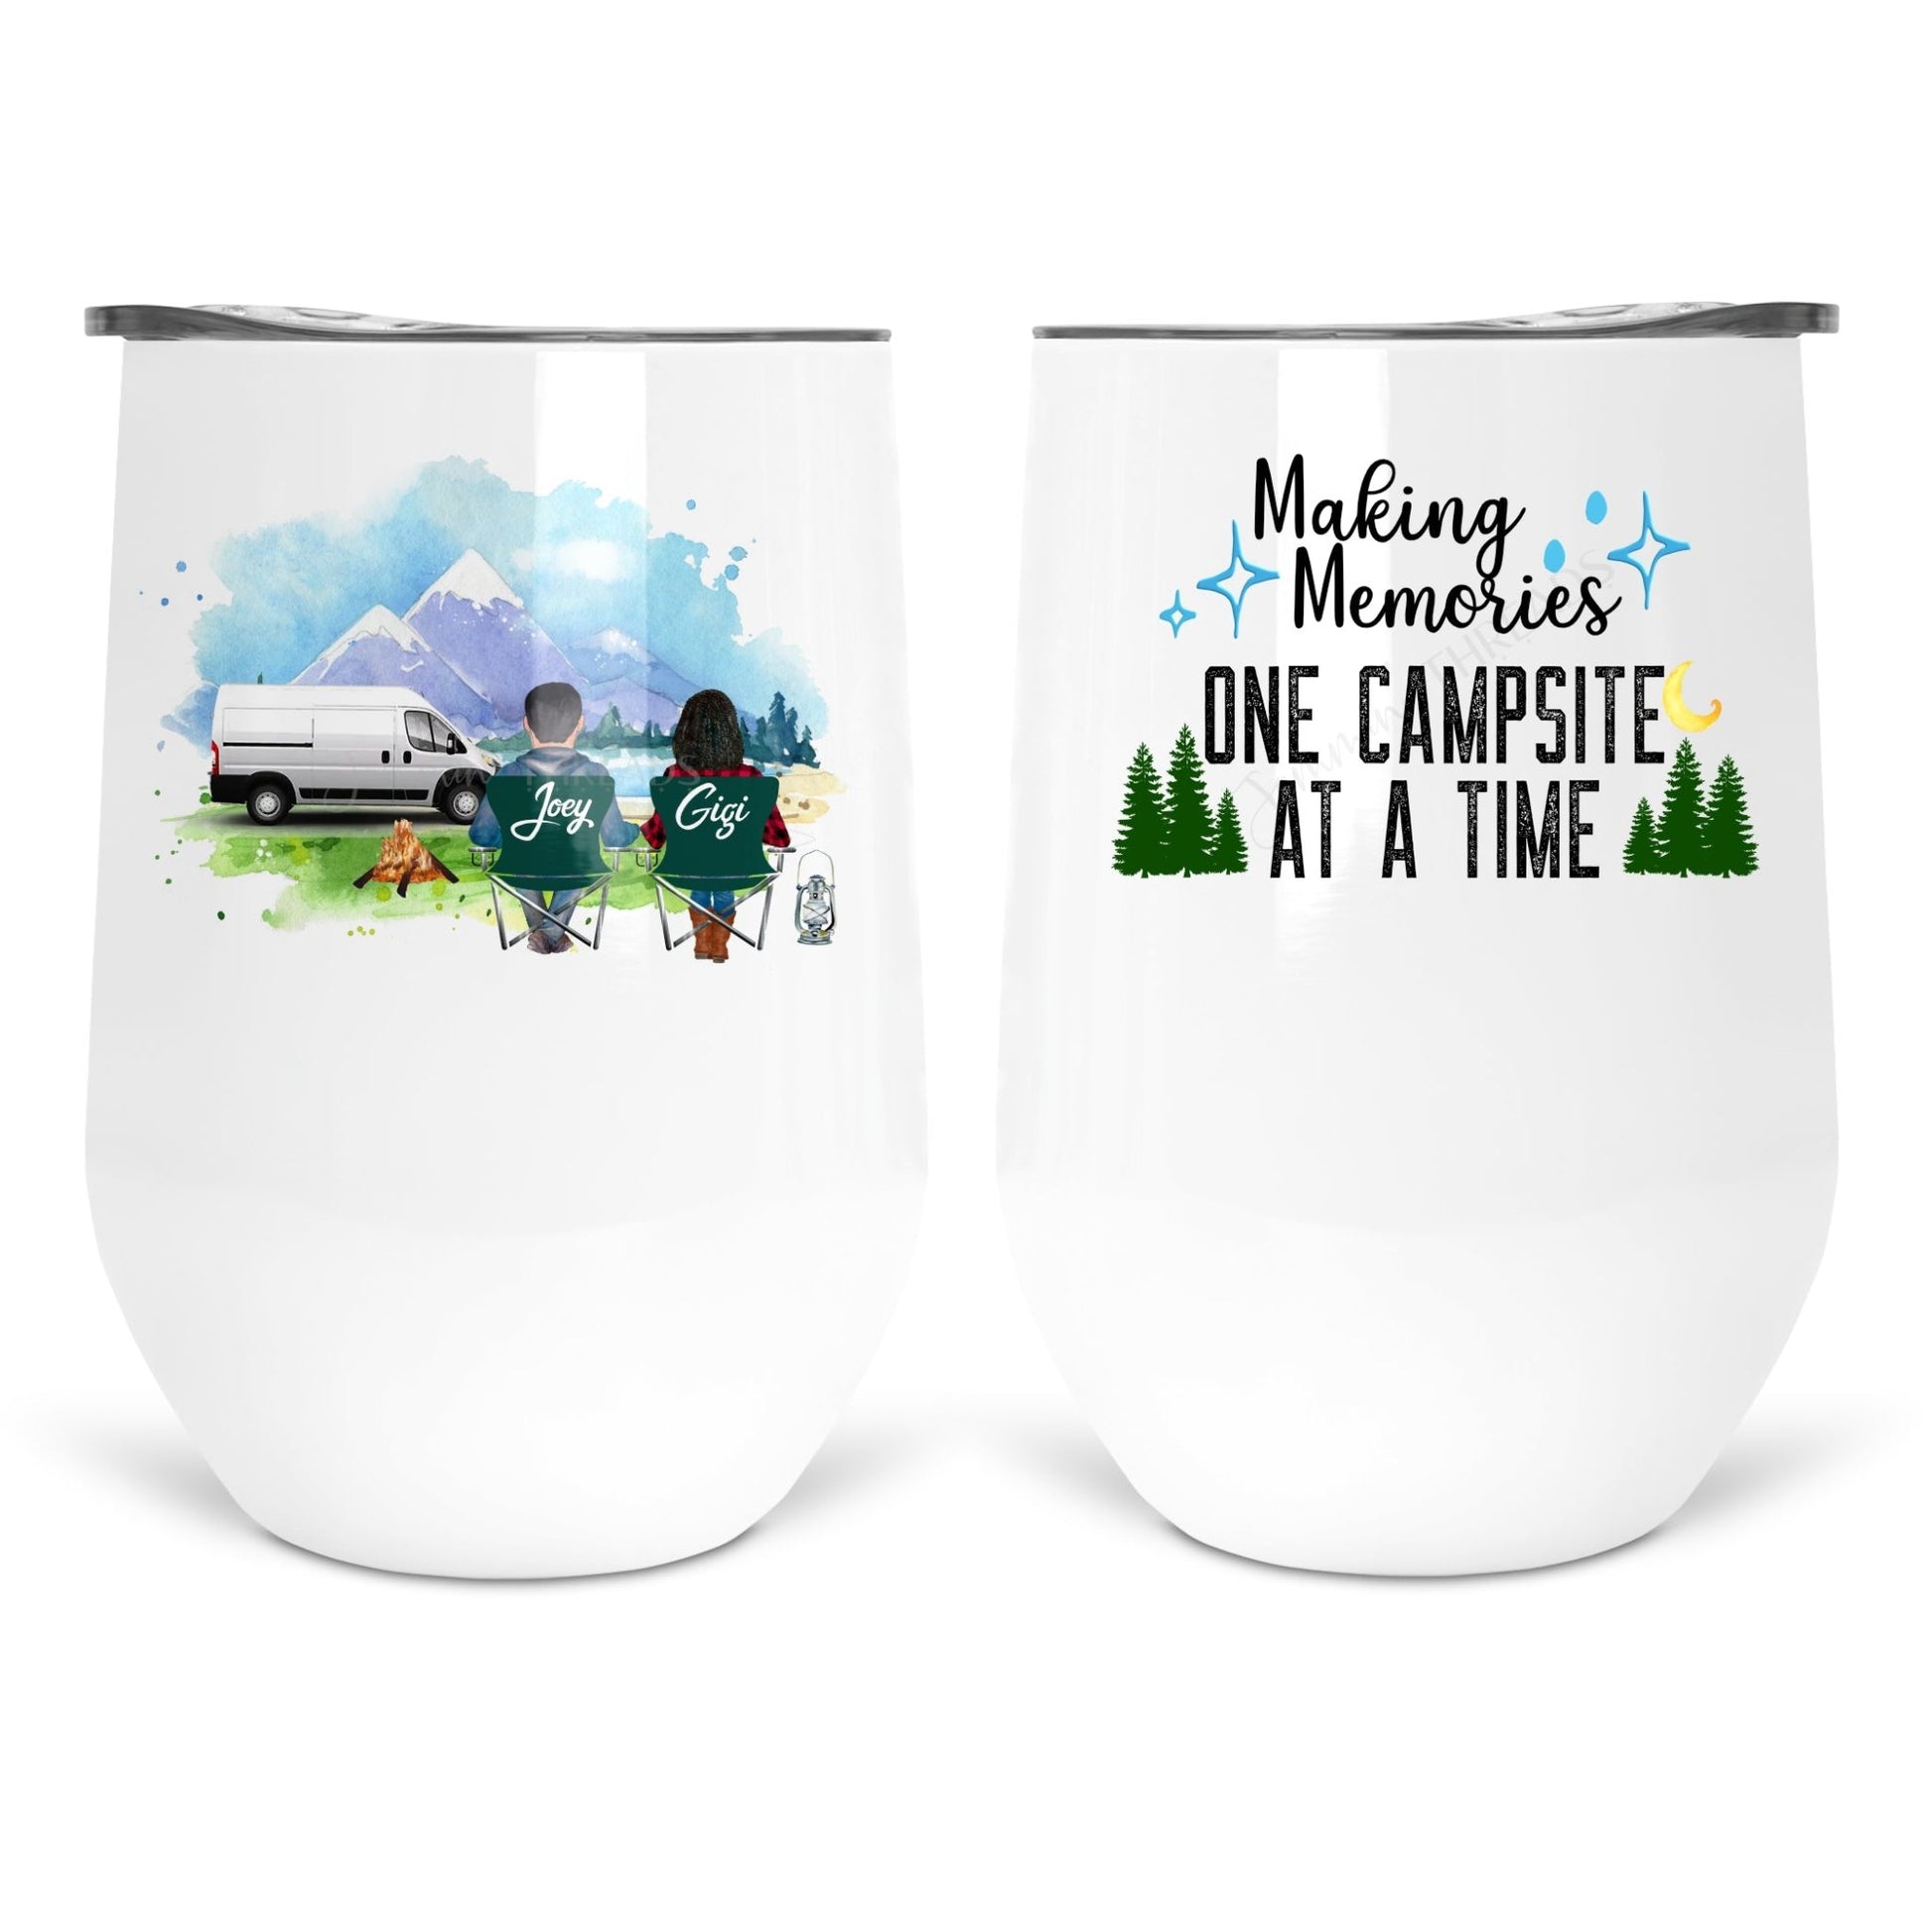 Making Memories One Campsite at a time - Class B Camper Van - Jammin Threads